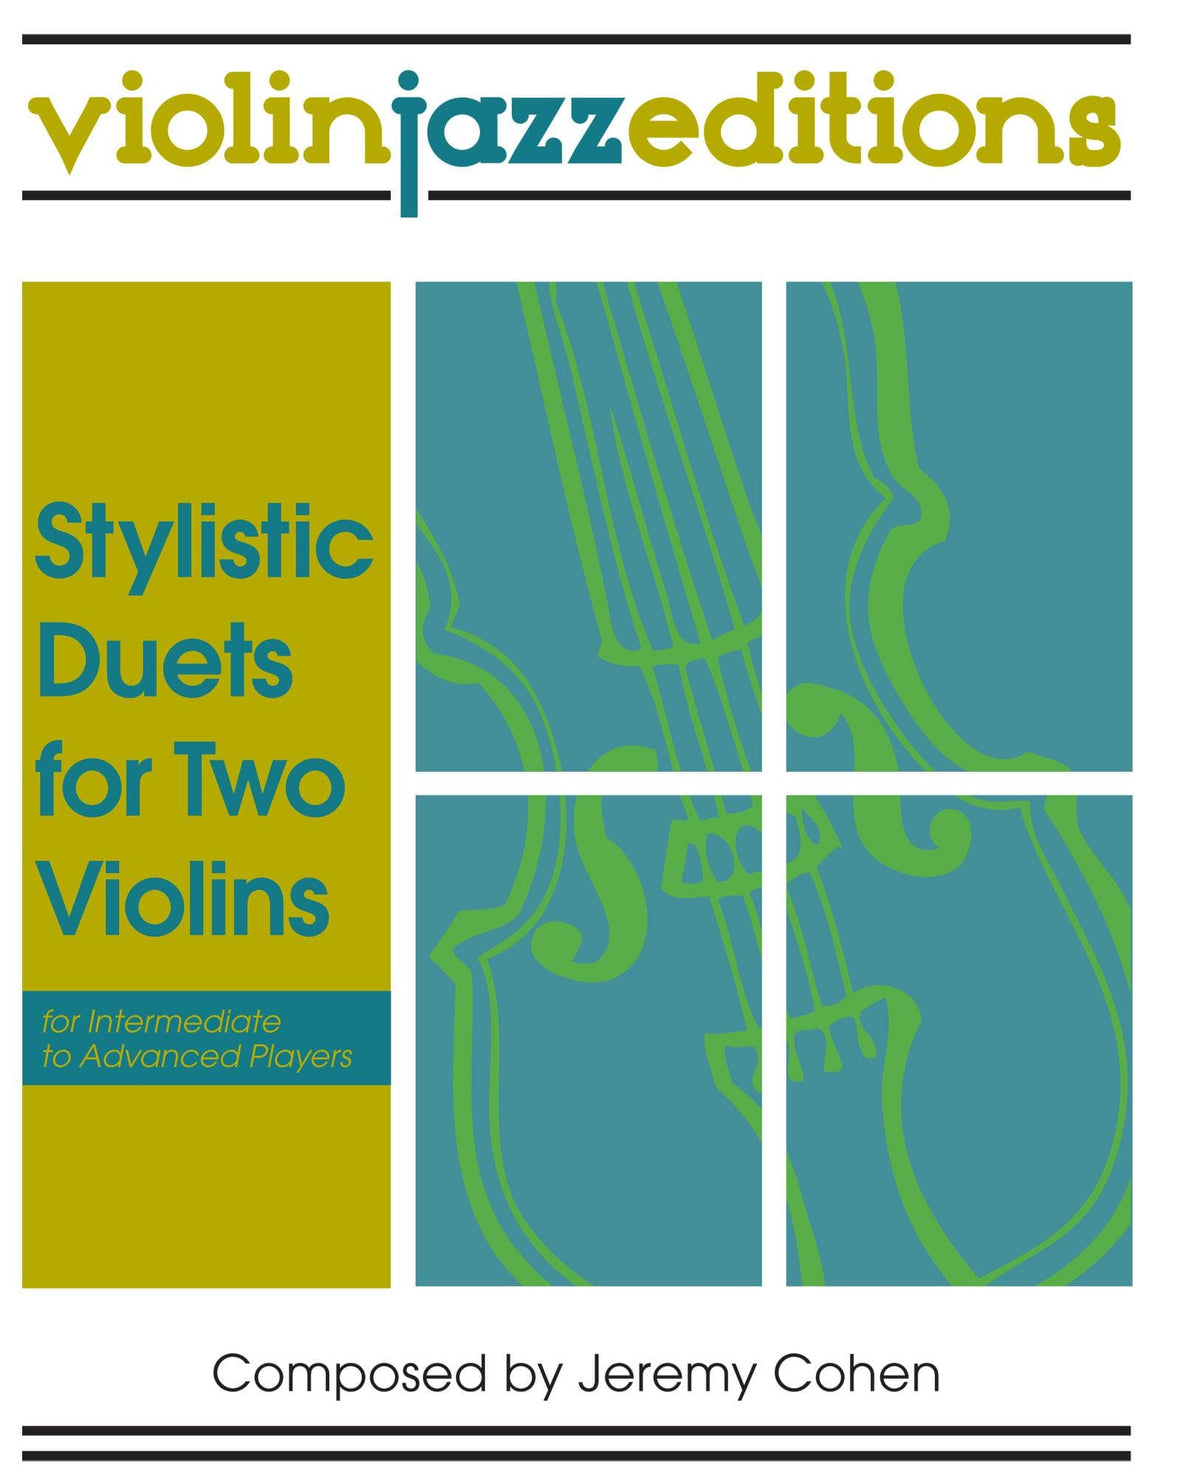 Cohen, Jeremy - Stylistic Duets for Two Violins - Violinjazz Editions - Digital Download